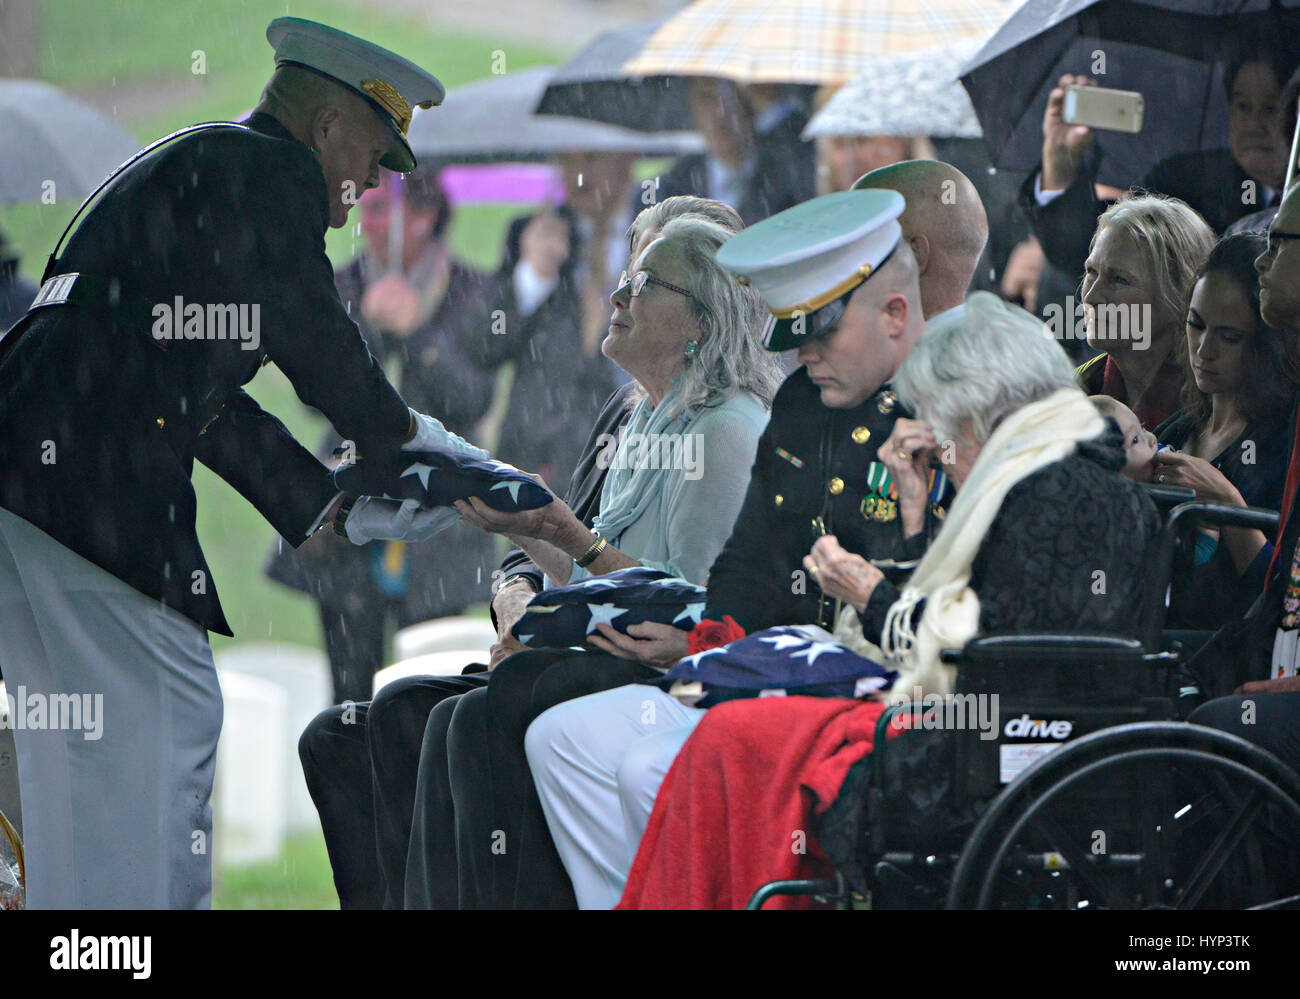 Arlington, Virginia, USA. 6th Apr, 2017. Commandant of the Marine Corps Gen. Robert Neller, left, presents the American flag to Carolyn Glenn, daughter of John Glenn as window Annie Glenn is comforted during the graveside service in Section 35 of Arlington National Cemetery April 6, 2017 in Arlington, Virginia. Glenn, the first American astronaut to orbit the Earth and later a United States senator, died at the age of 95 on December 8, 2016. Credit: Planetpix/Alamy Live News Stock Photo